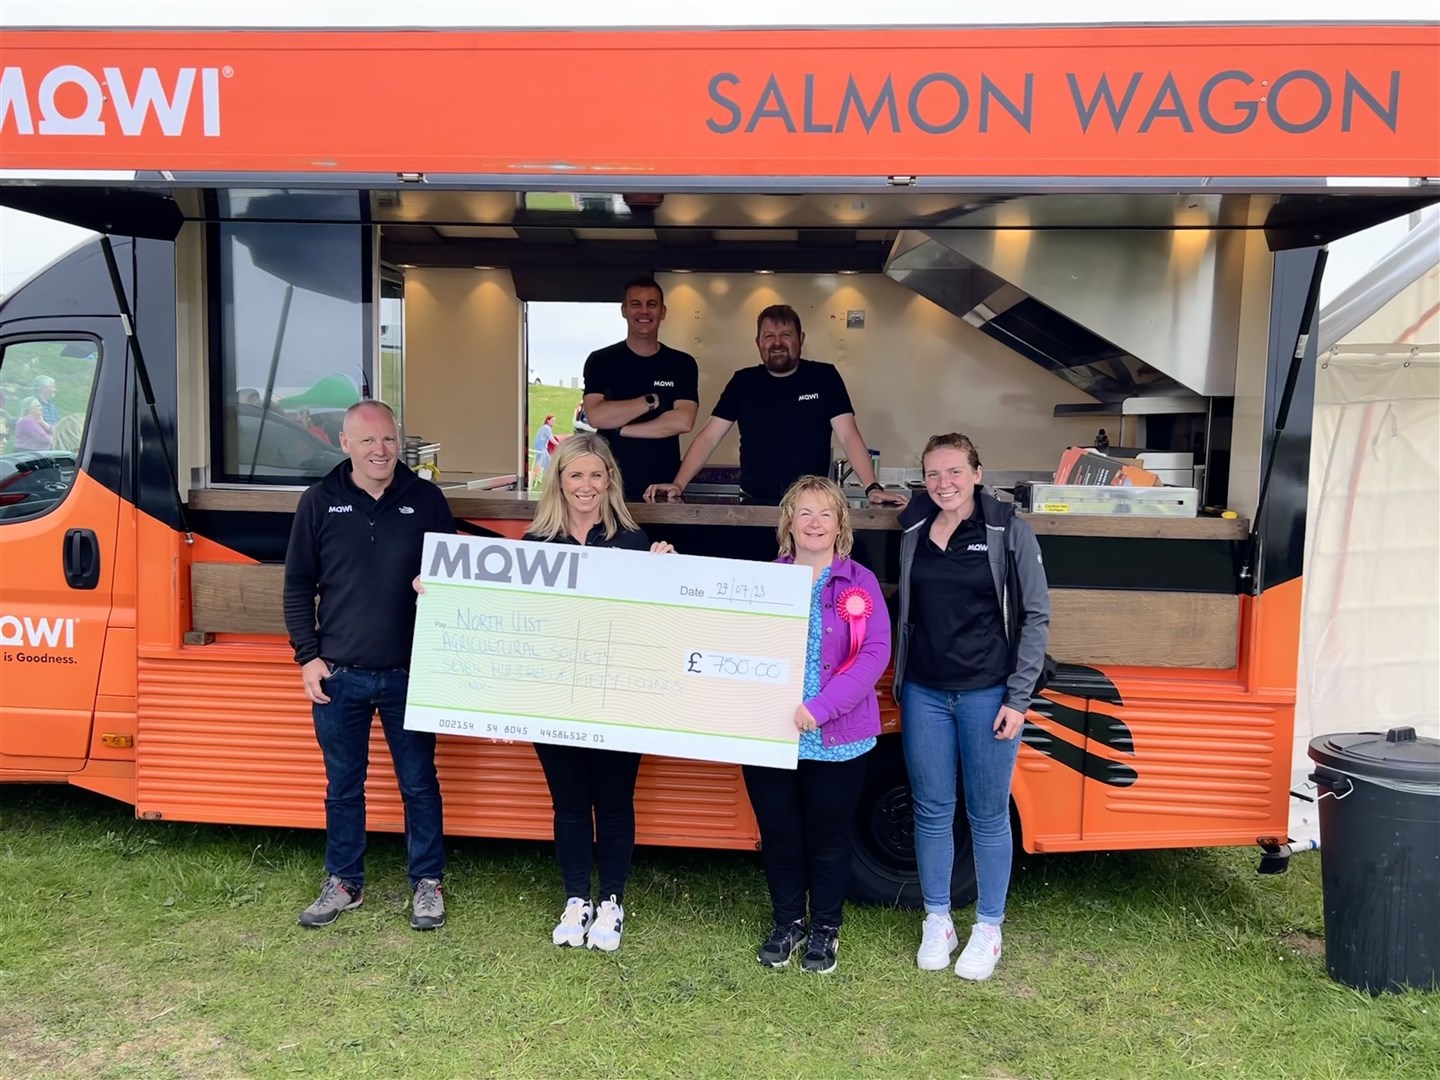 One of the recent beneficiaries of the salmon wagon scheme, Joan Ferguson of North uist Agricultural Society, accepts a cheque from Jayne Mackay, community engagement officer at Mowi Scotland.